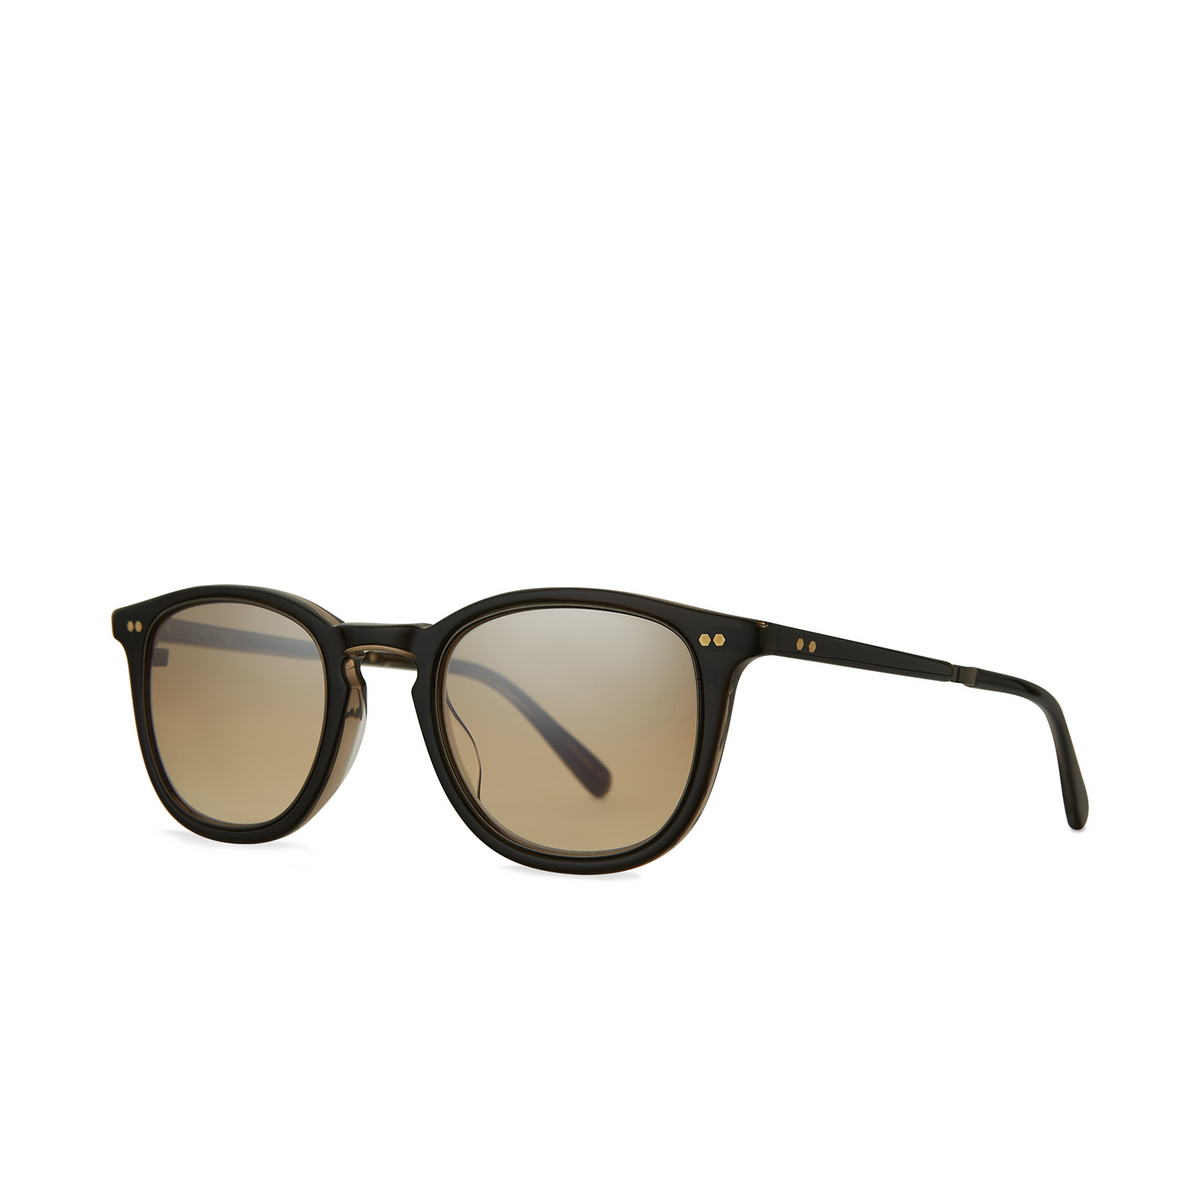 Mr. Leight® Square Sunglasses: Coopers S color Black Tar - Antique Gold / Smokey Bktr-atg/smky - three-quarters view.